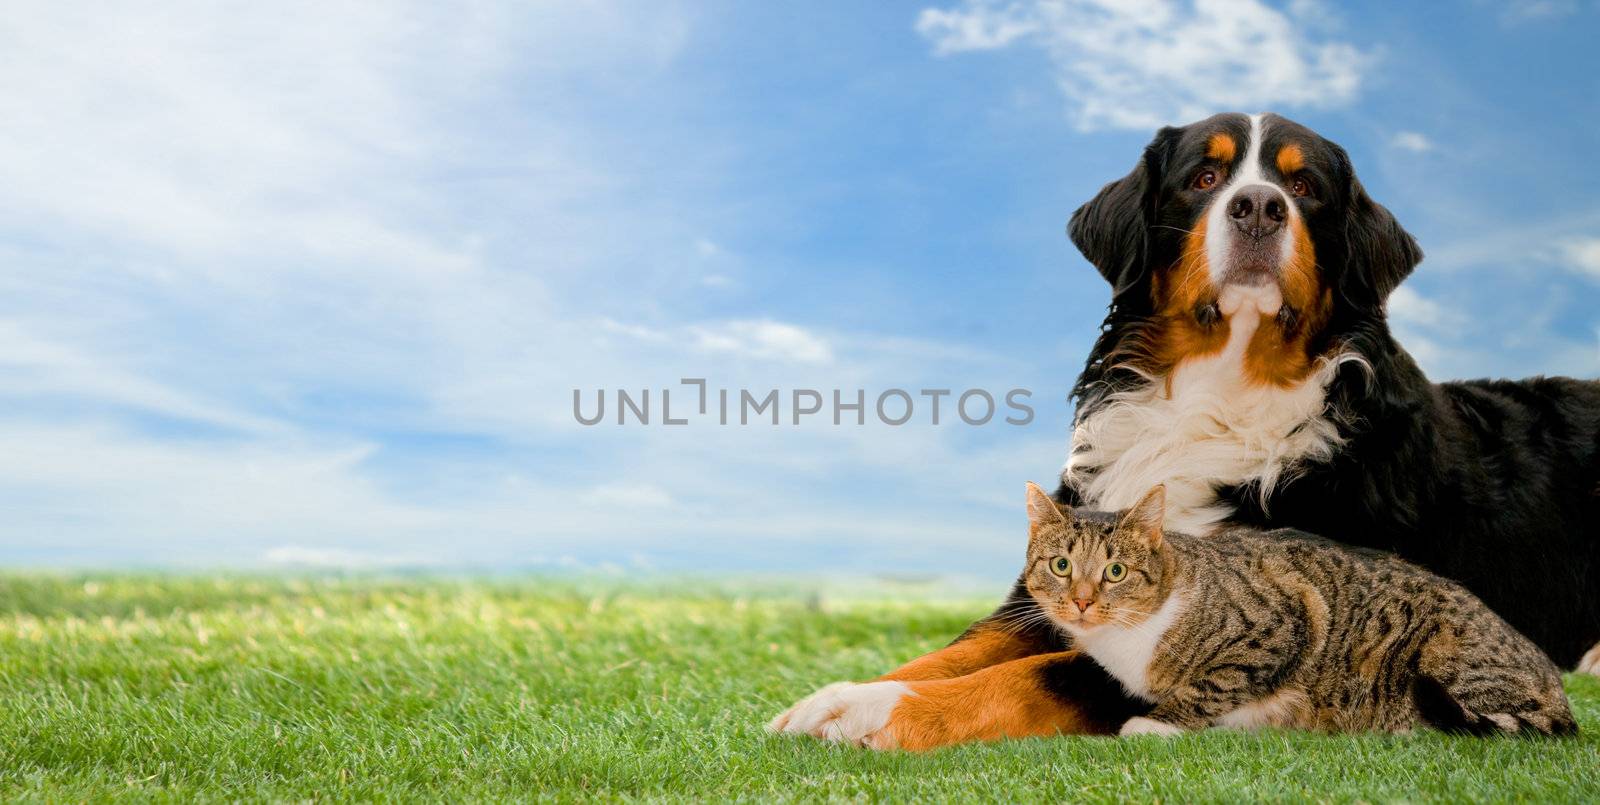 Dog and cat together on grass, sunny spring day and blue sky. Panorama version